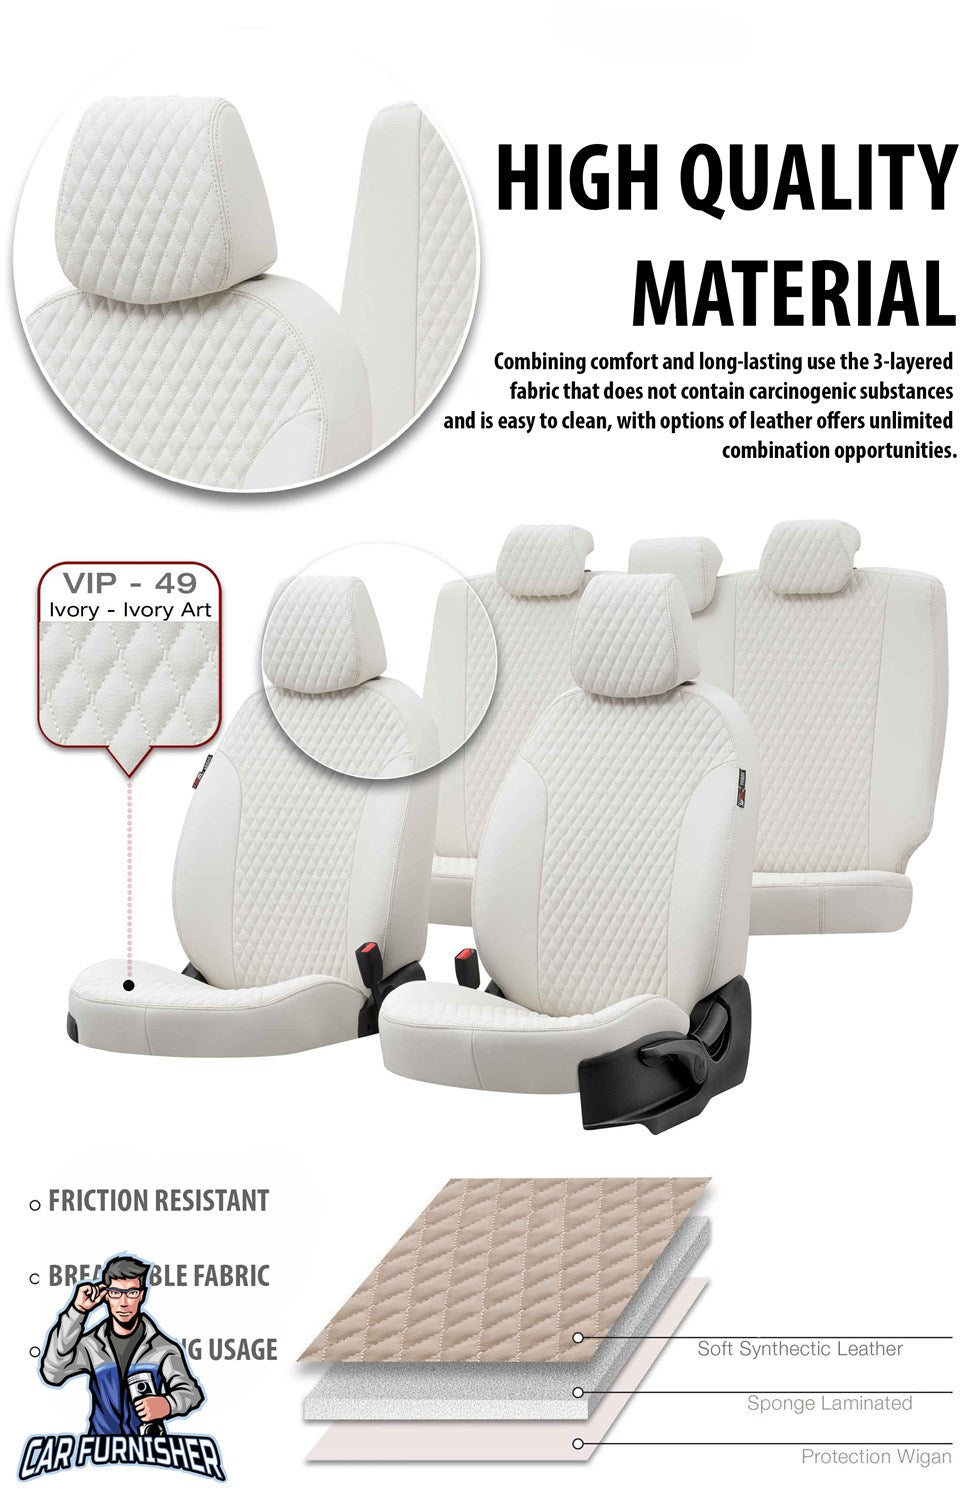 Ford Kuga Seat Covers Amsterdam Leather Design Ivory Leather